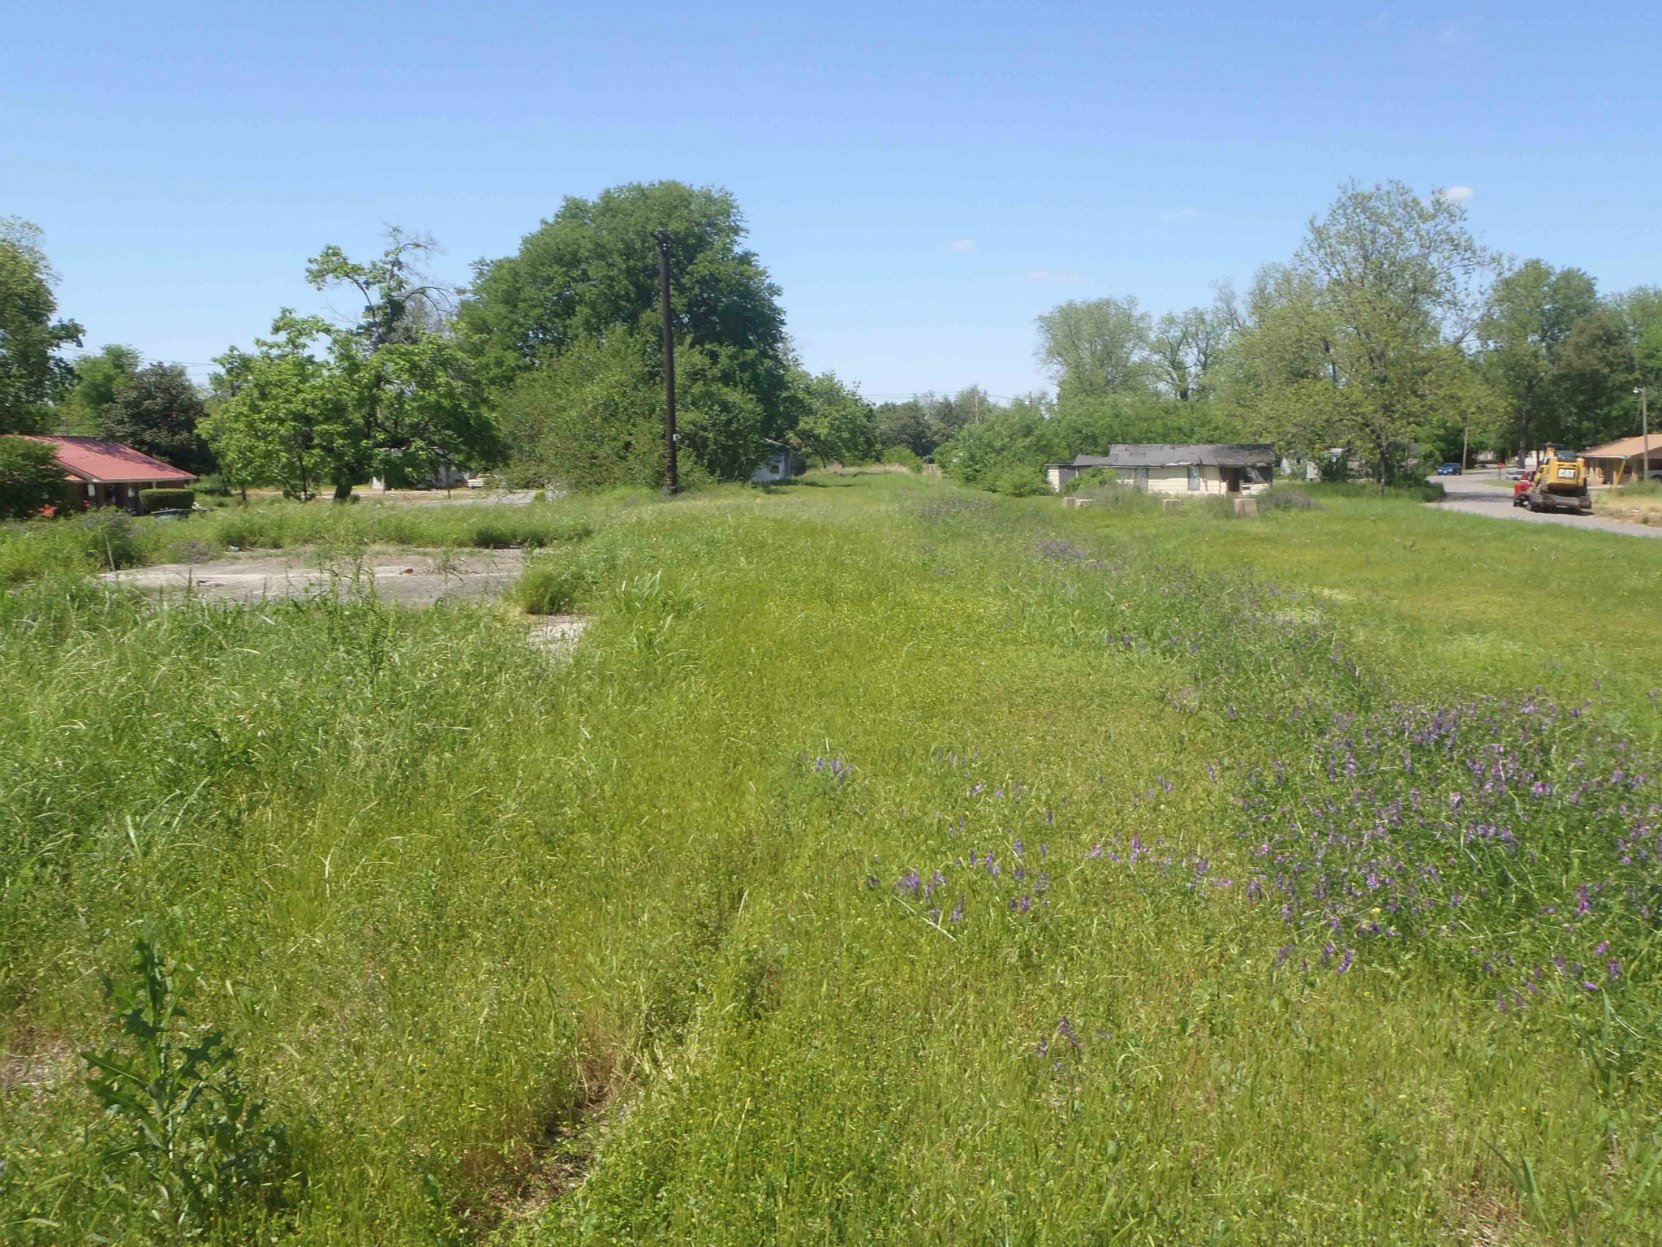 The site of Rosedale's former train station, now the location of the Mississippi Blues Trail's Rosedale marker